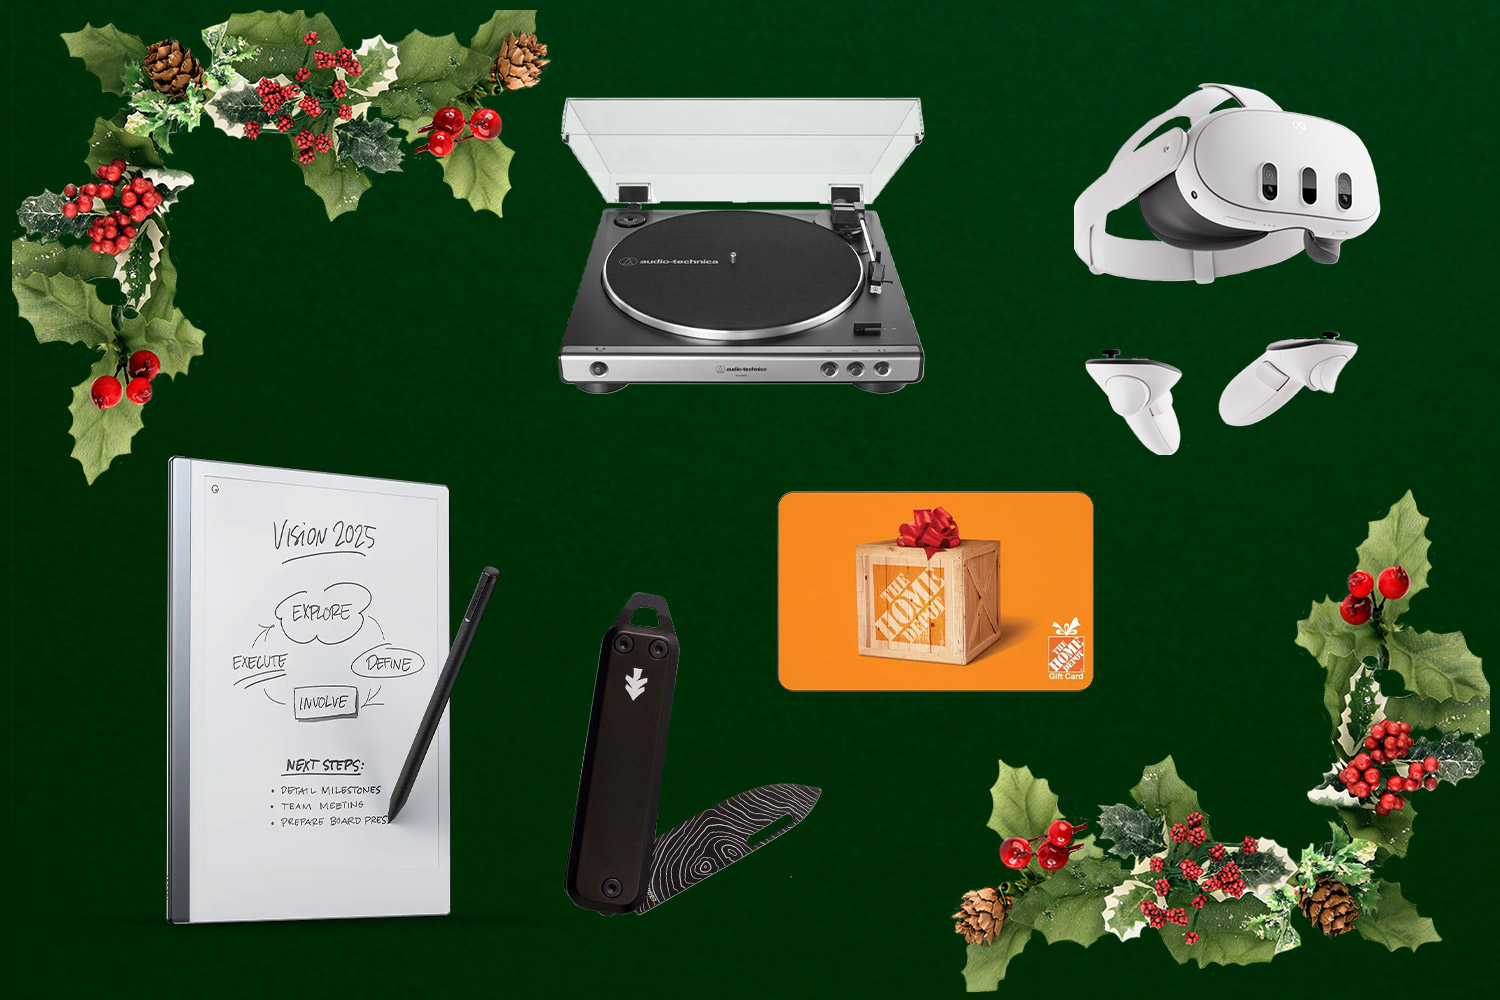 A record player, gift card, knife, tablet, and VR headset on a green background